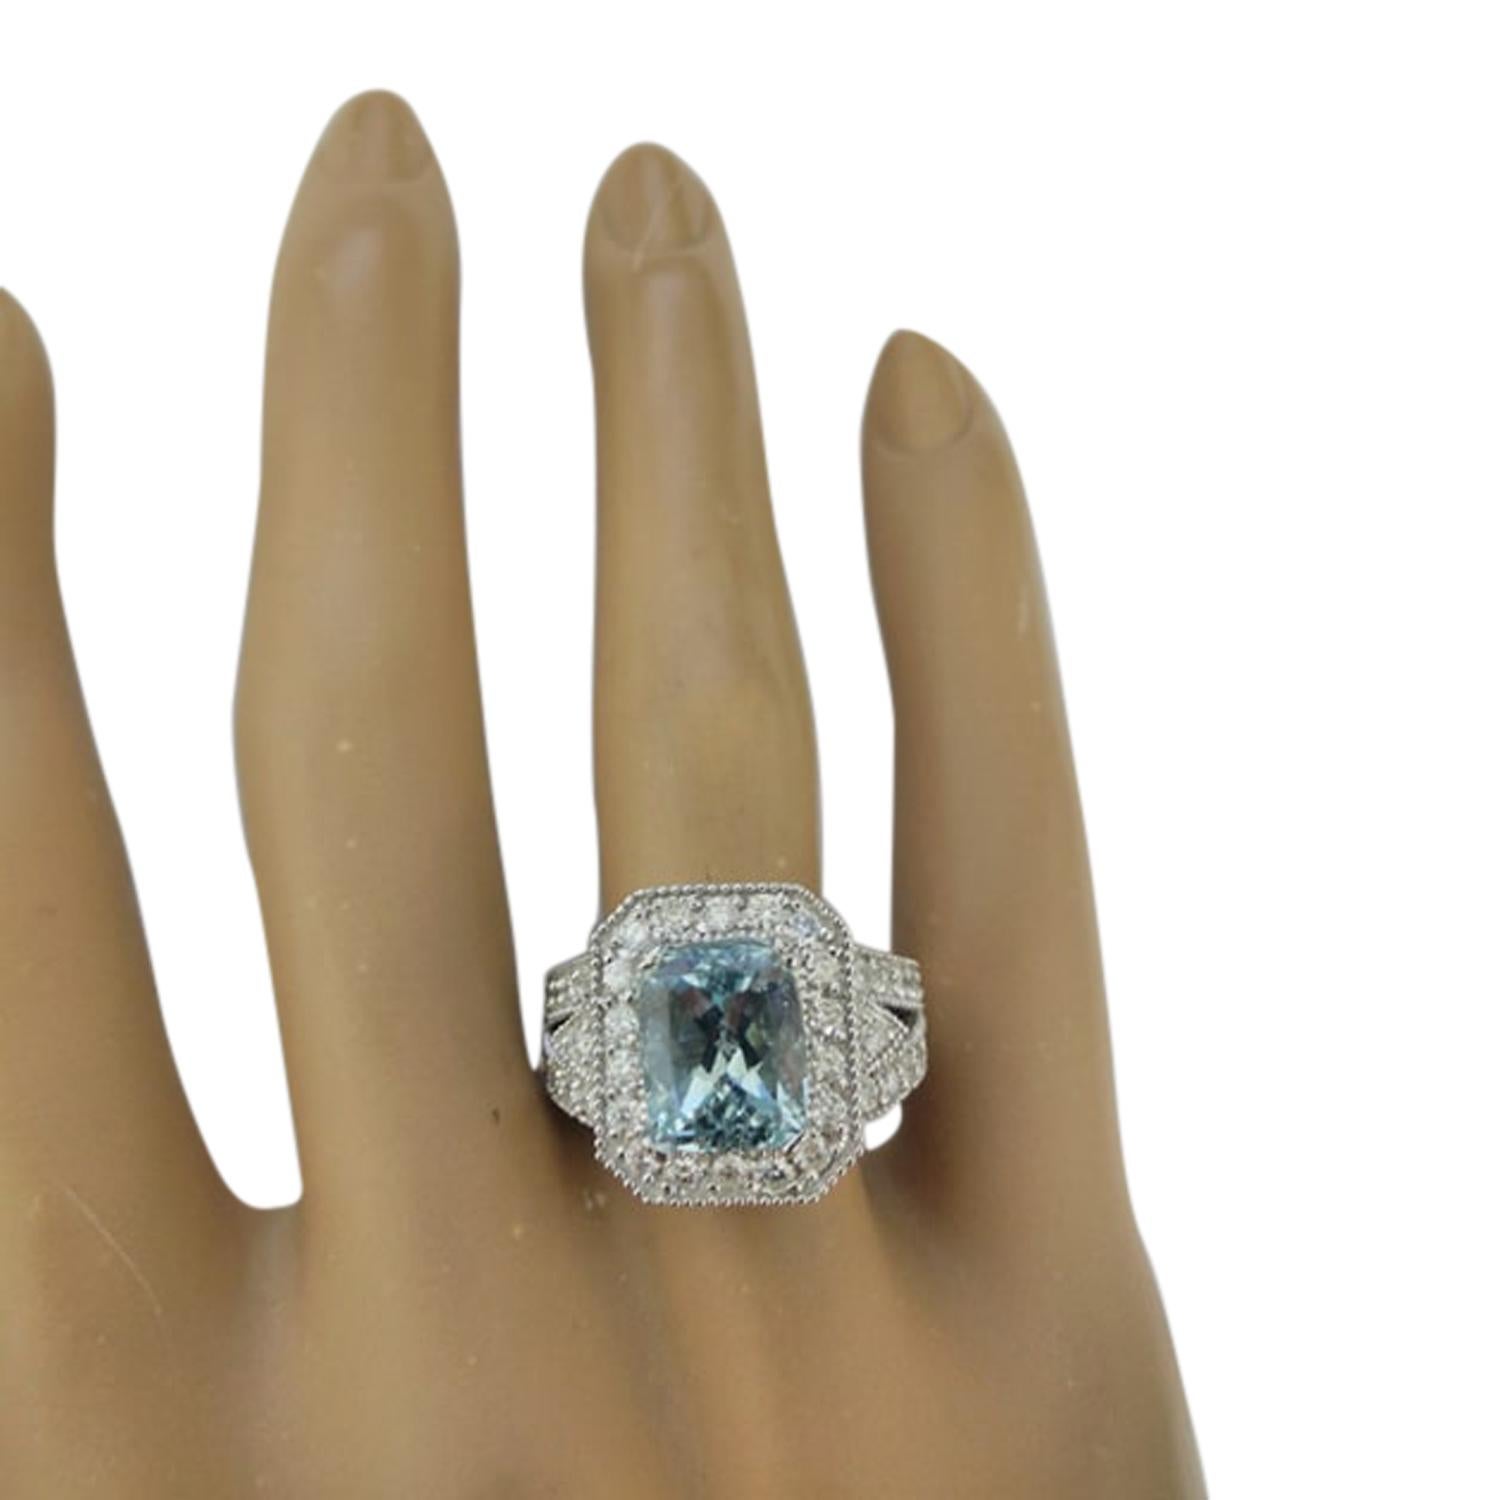 4.68 Carat Natural Aquamarine 14 Karat Solid White Gold Diamond Ring
Stamped: 14K 
Total Ring Weight: 9.7 Grams 
Aquamarine Weight: 3.68 Carat (10.00x8.00 Millimeters)  
Diamond Weight: 1.00 Carat (F-G Color, VS2-SI1 Clarity )
Quantity: 40
Face